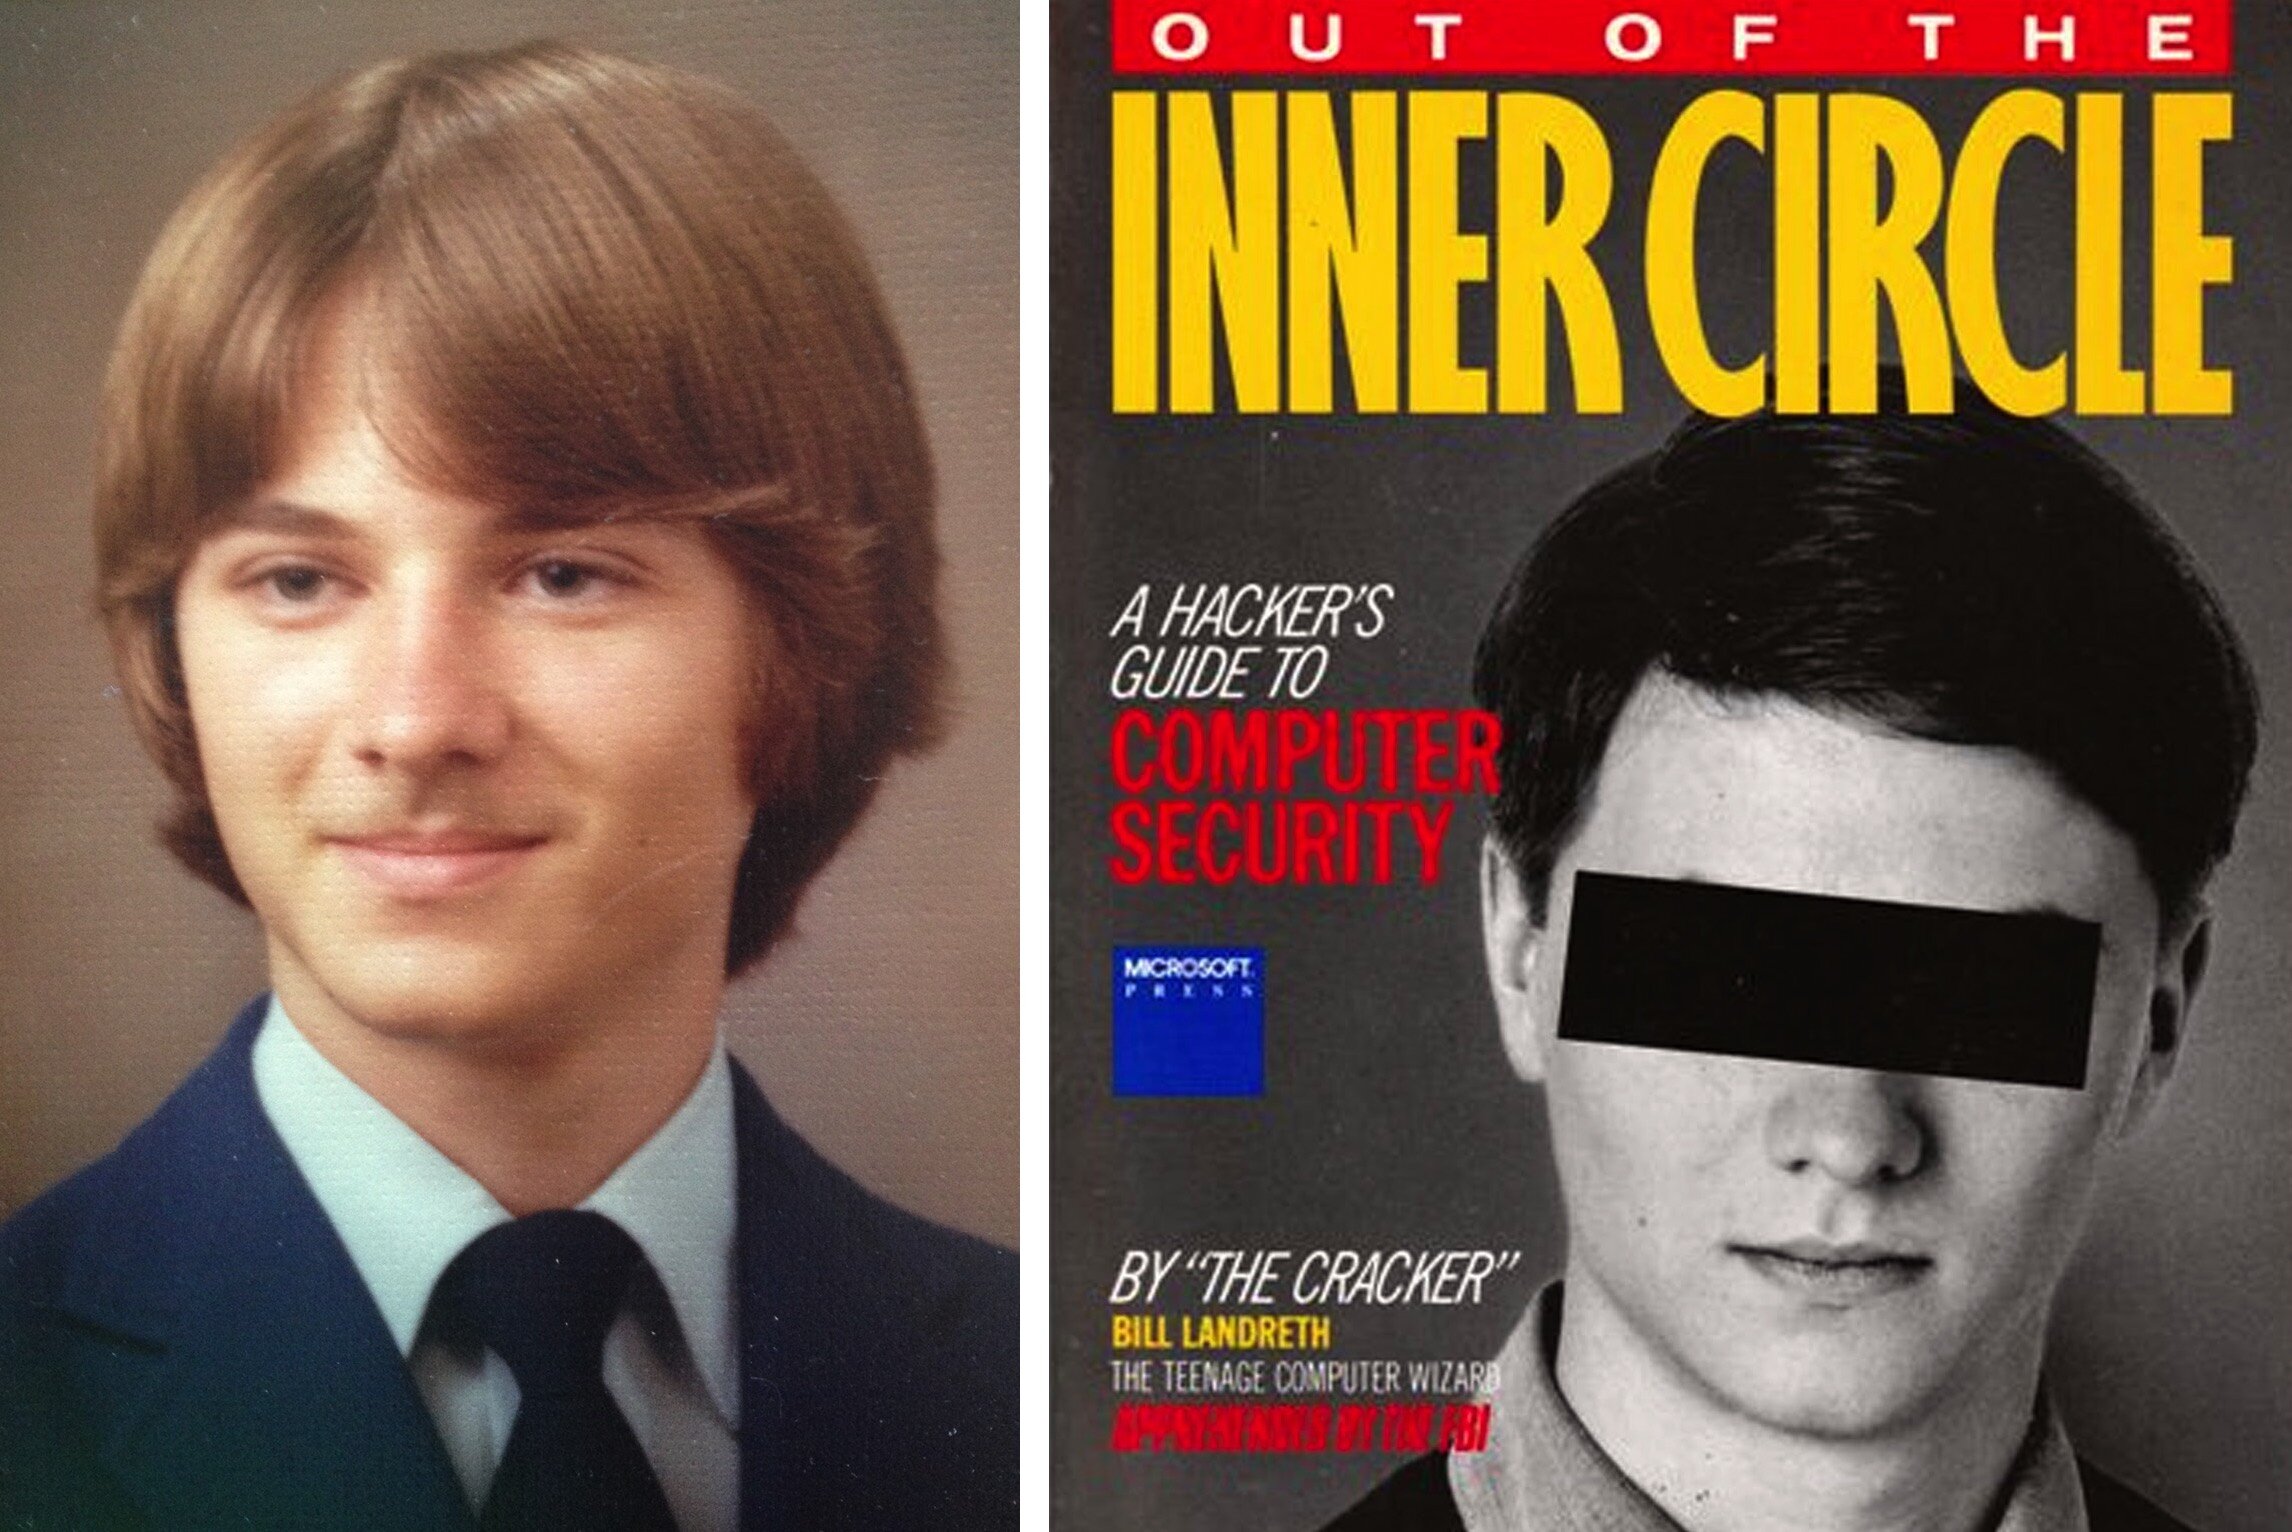 bill landreth hacker - Out Of The Inner Circle A Hacker'S Guide To Computer Security By "The Cracker" Bill Landreth The Teenage Computer Wizar